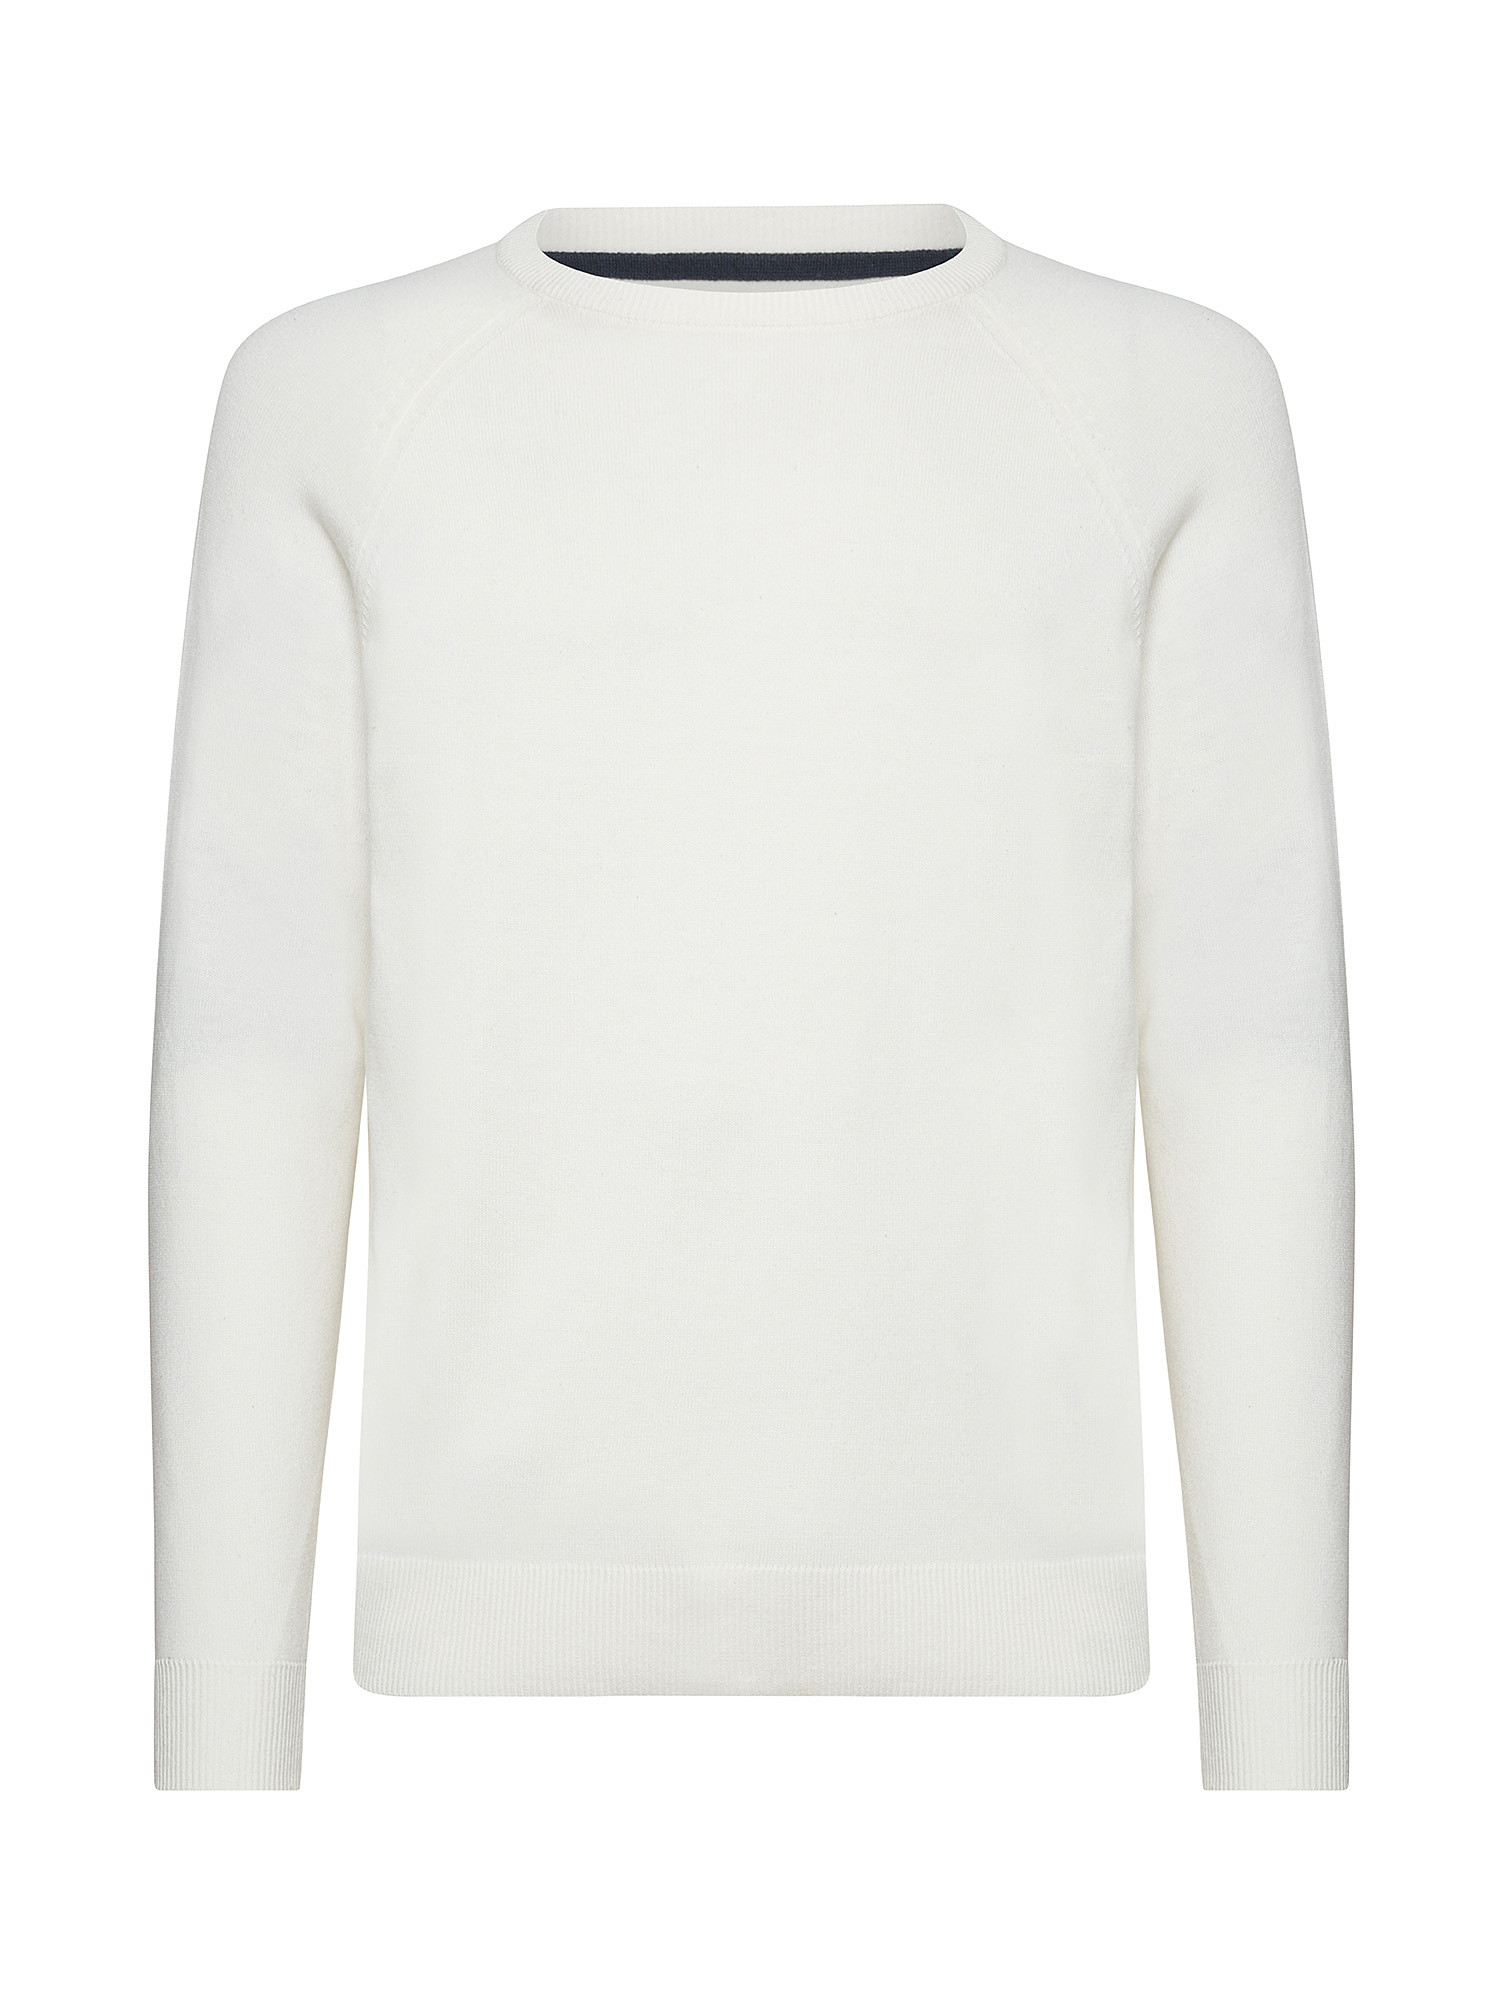 Pepe Jeans - Pullover girocollo in cotone, Bianco avorio, large image number 0